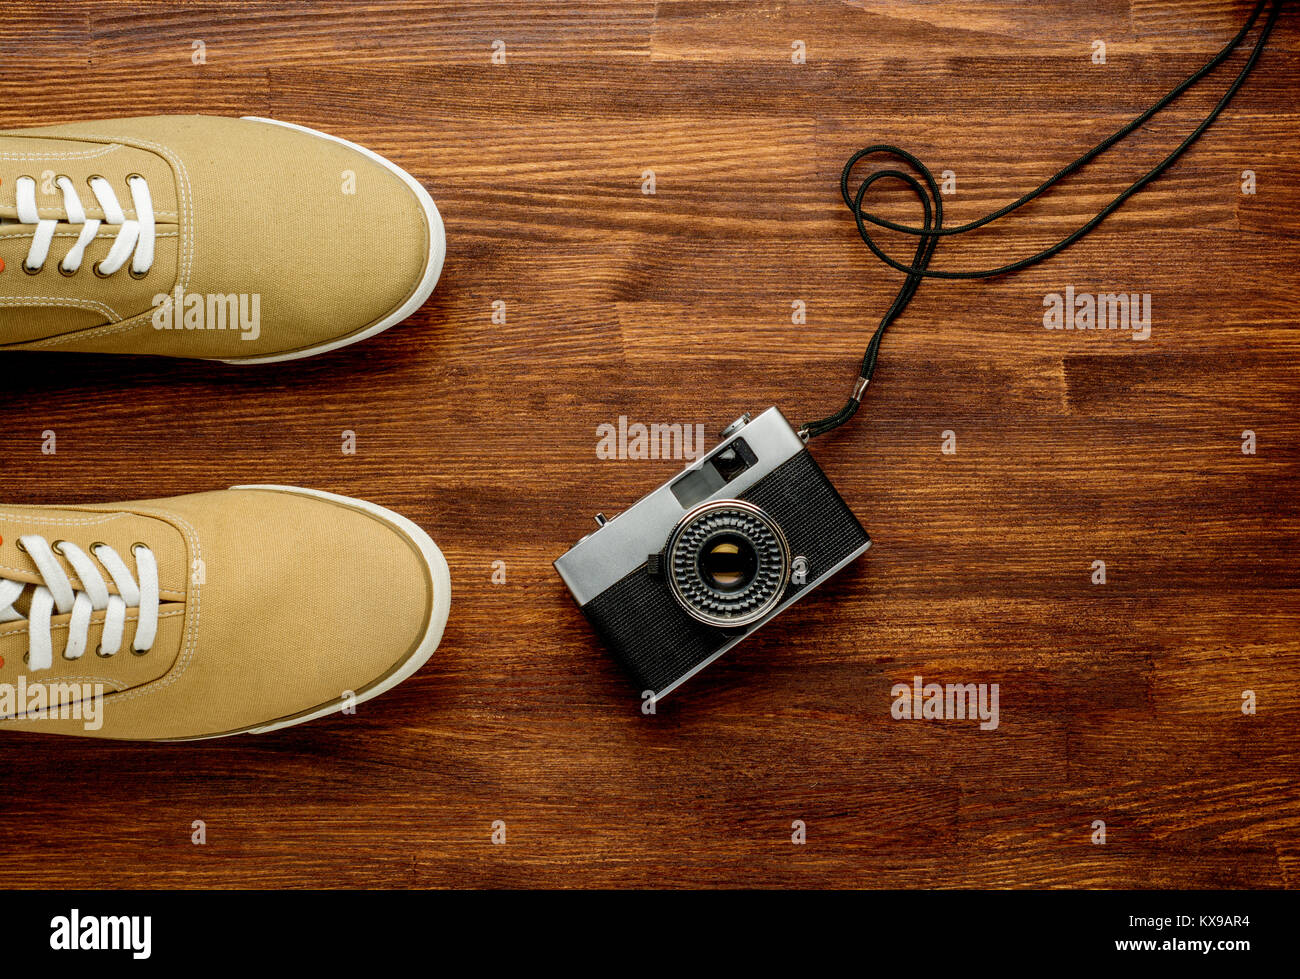 Vintage camera with sneakers on wooden background. Travel background. Horizontal Stock Photo